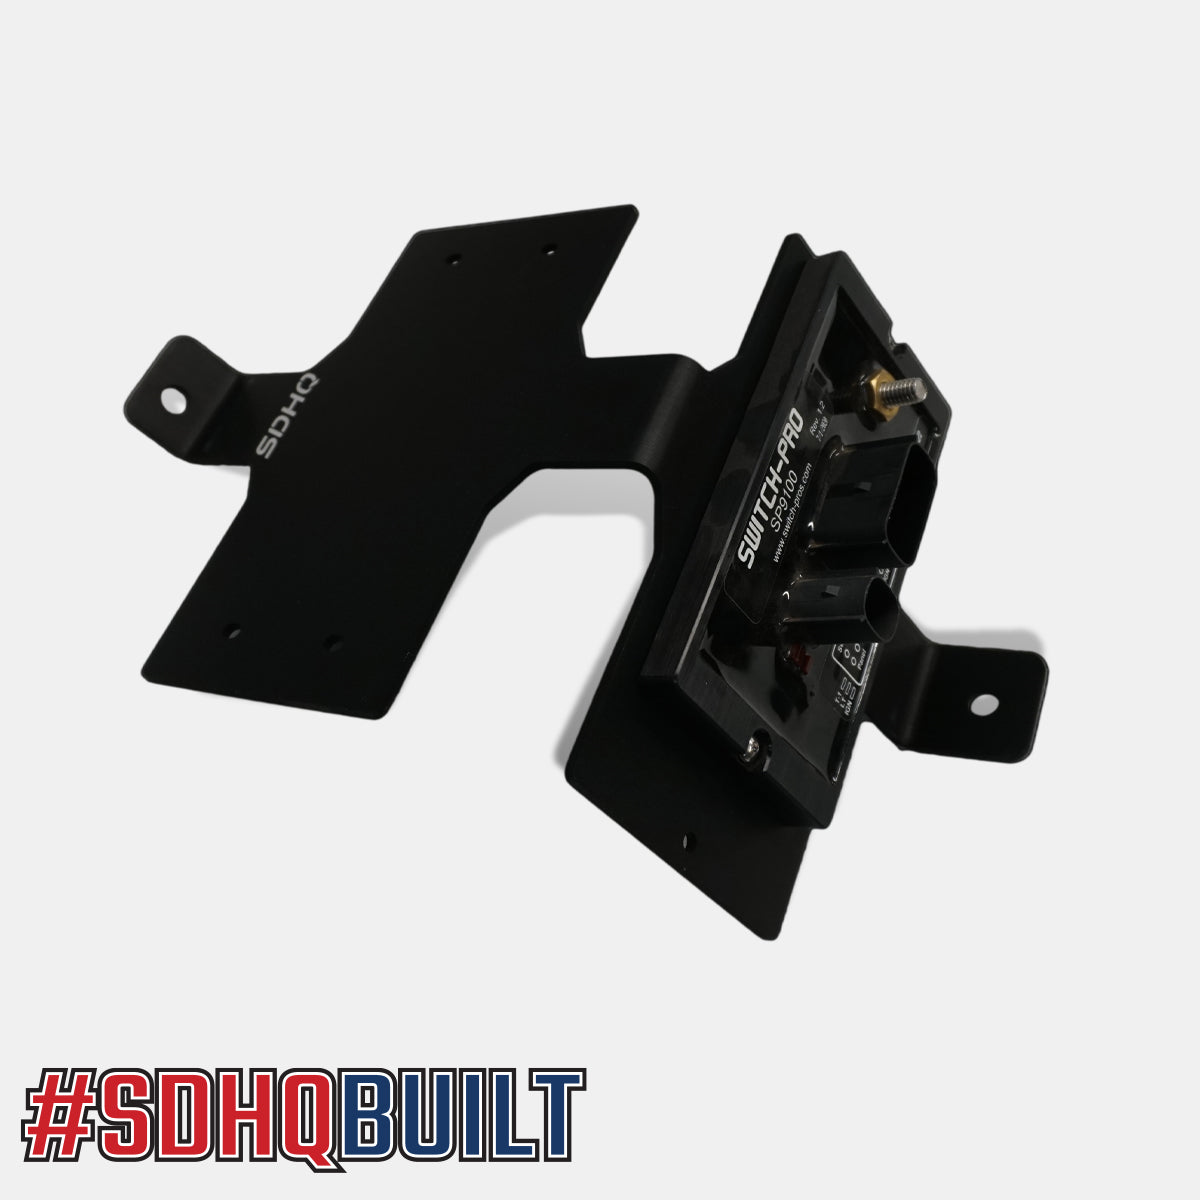 '22-Current Toyota Tundra SDHQ Built Switch-Pros Power Module Mount